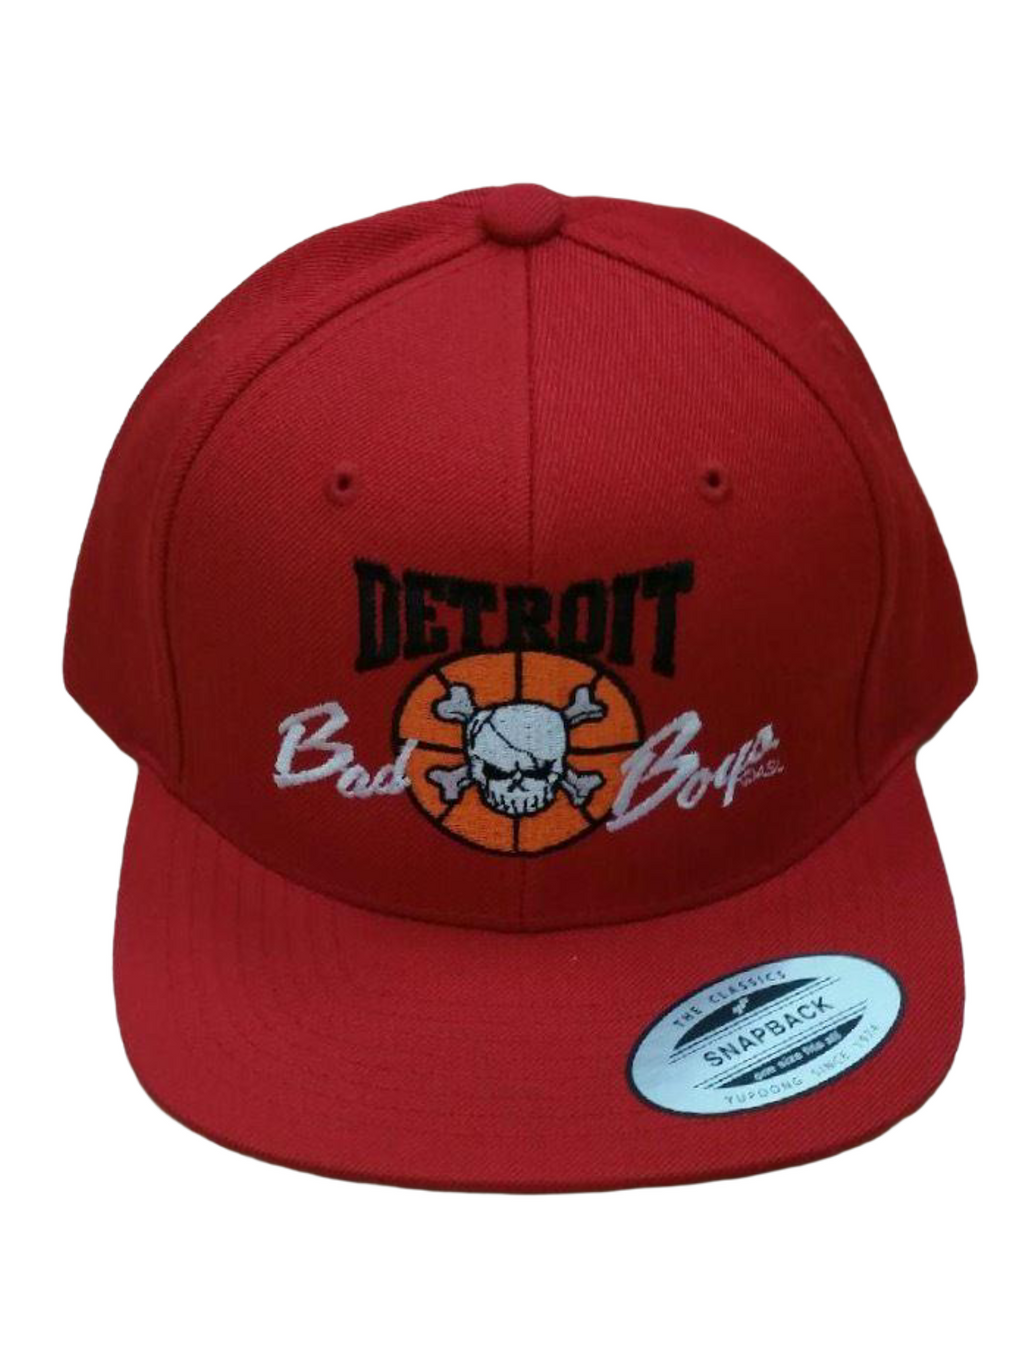 Authentic Detroit Bad Boys Red Snapback Hat